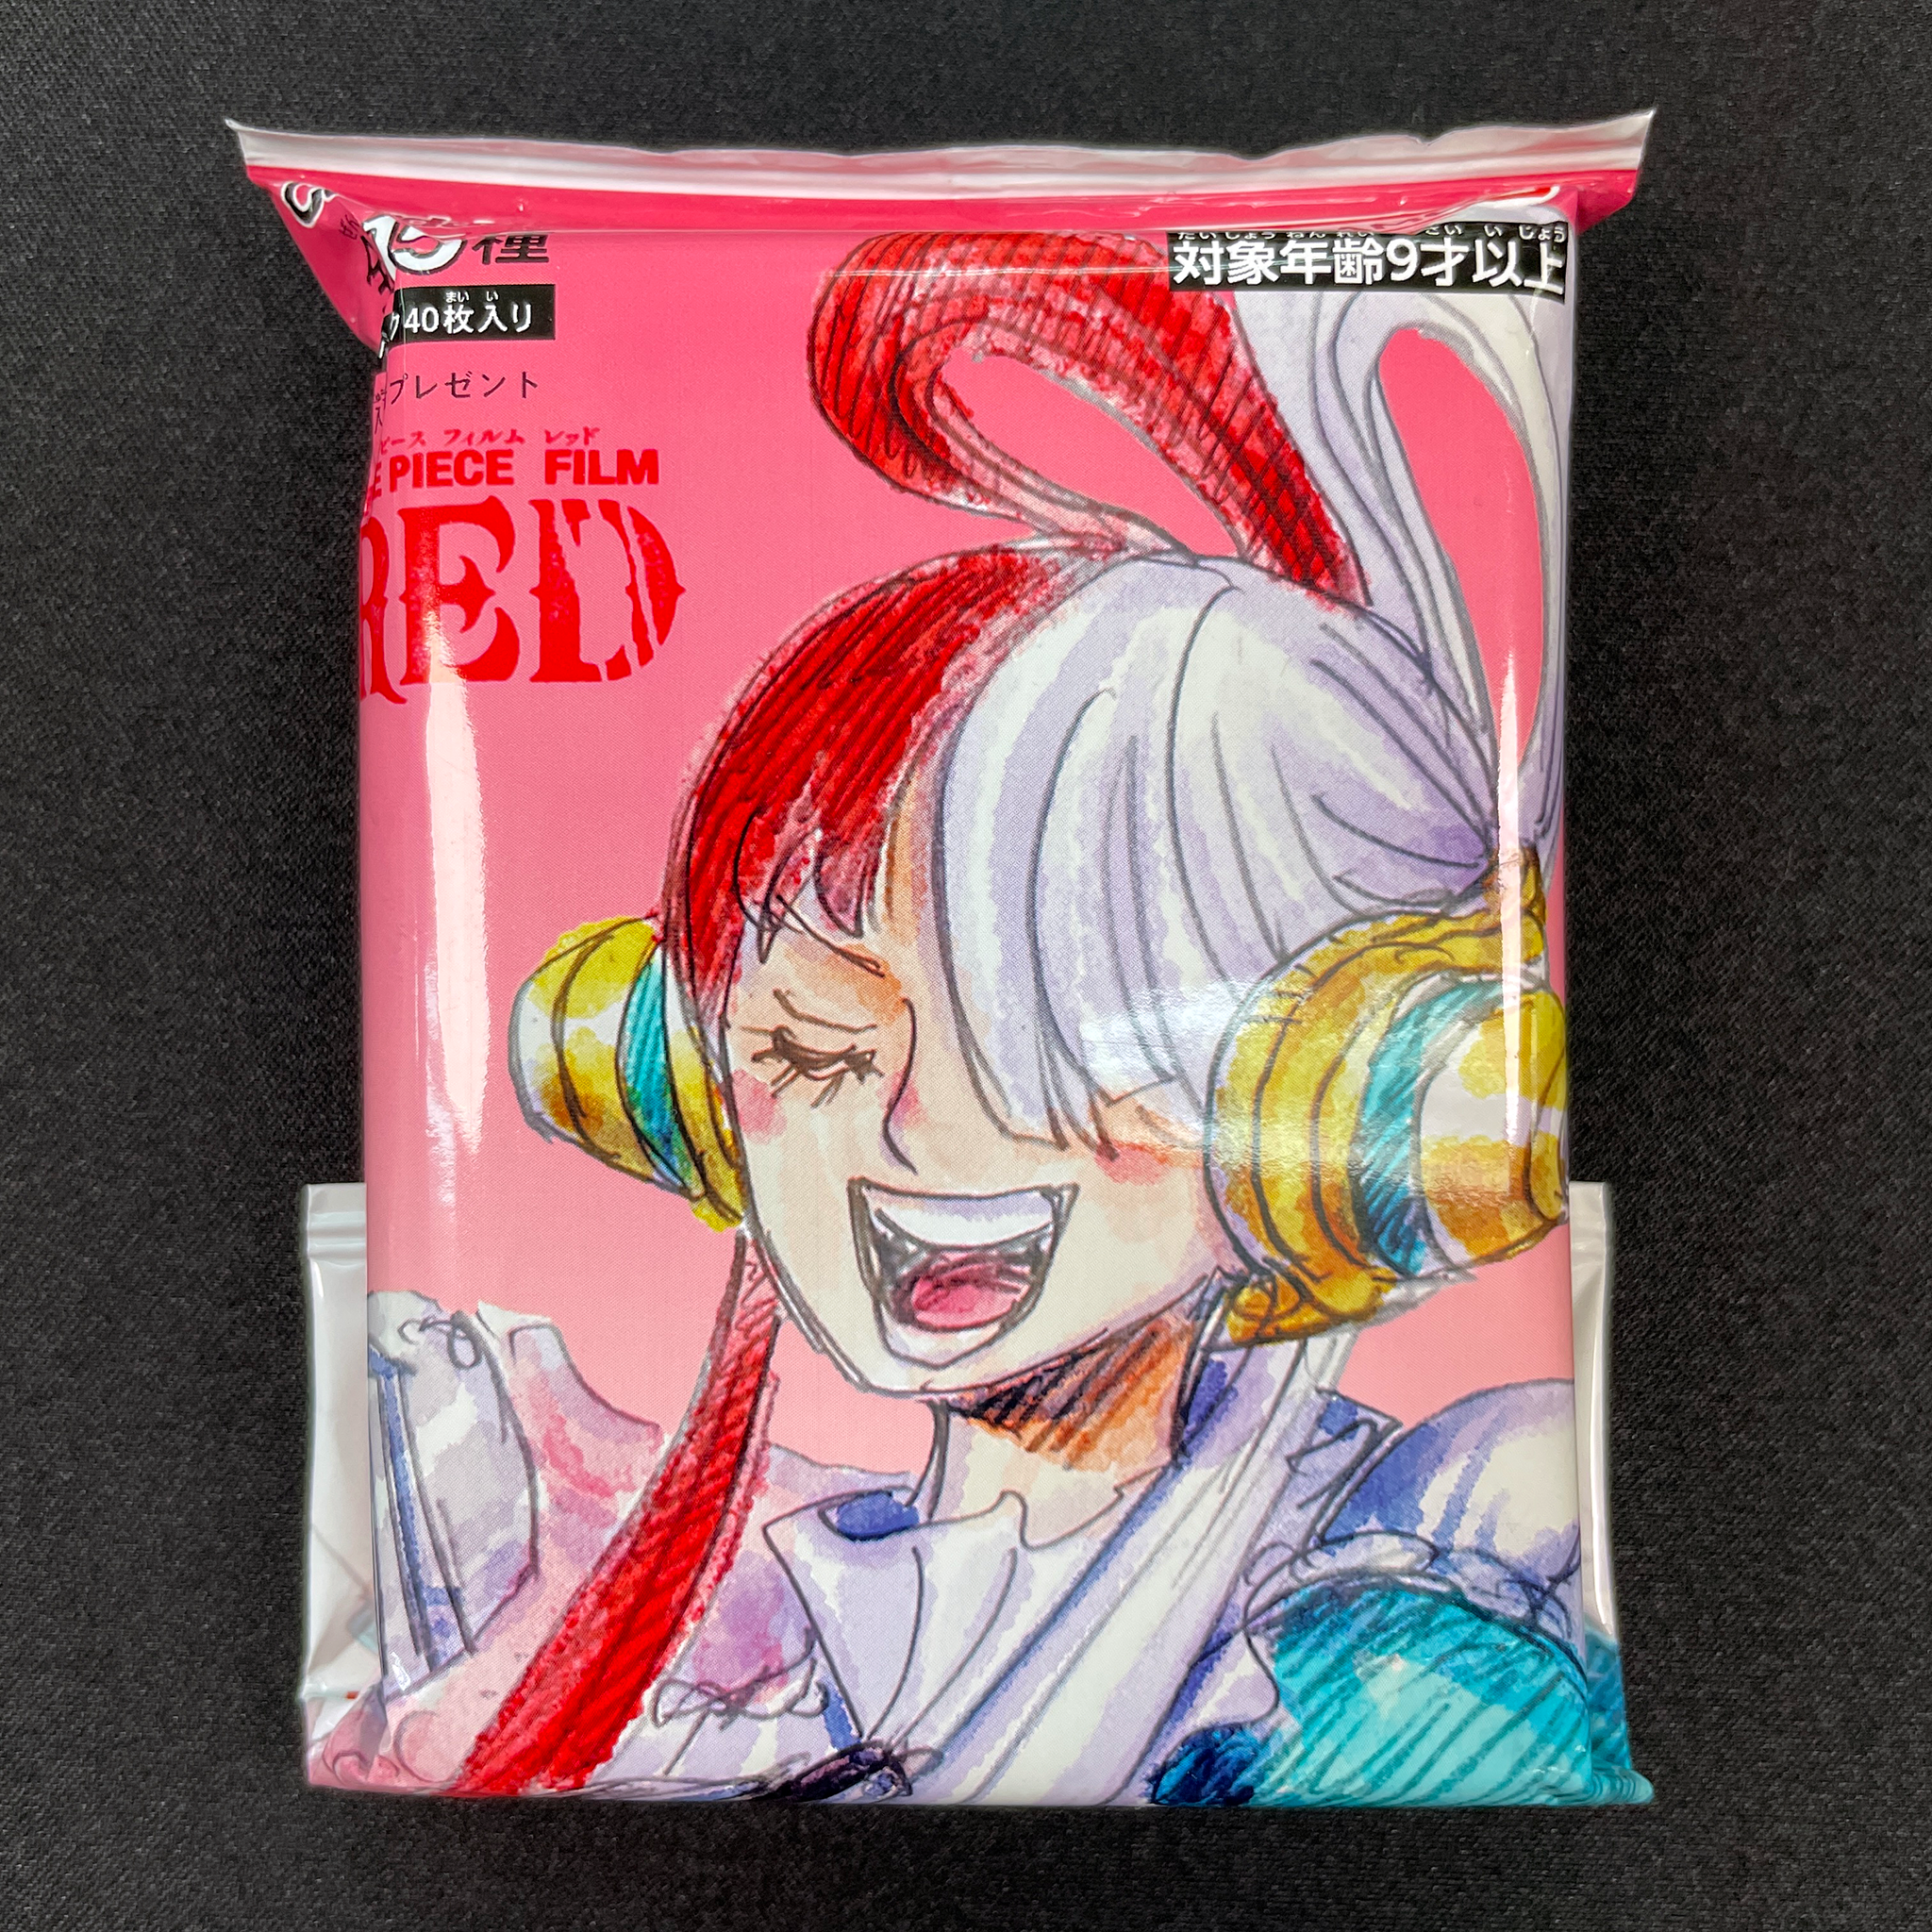 ONE PIECE CARD GAME TUTORIAL DECK  Release date: August 13 2022  Distributed in theaters for the purchase of a cinema ticket for the film ONE PIECE RED. All blister packages are distributed folded.  Limited to 500,000 copies  Contain 40 promotional cards for a total of 14 kinds of differents cards